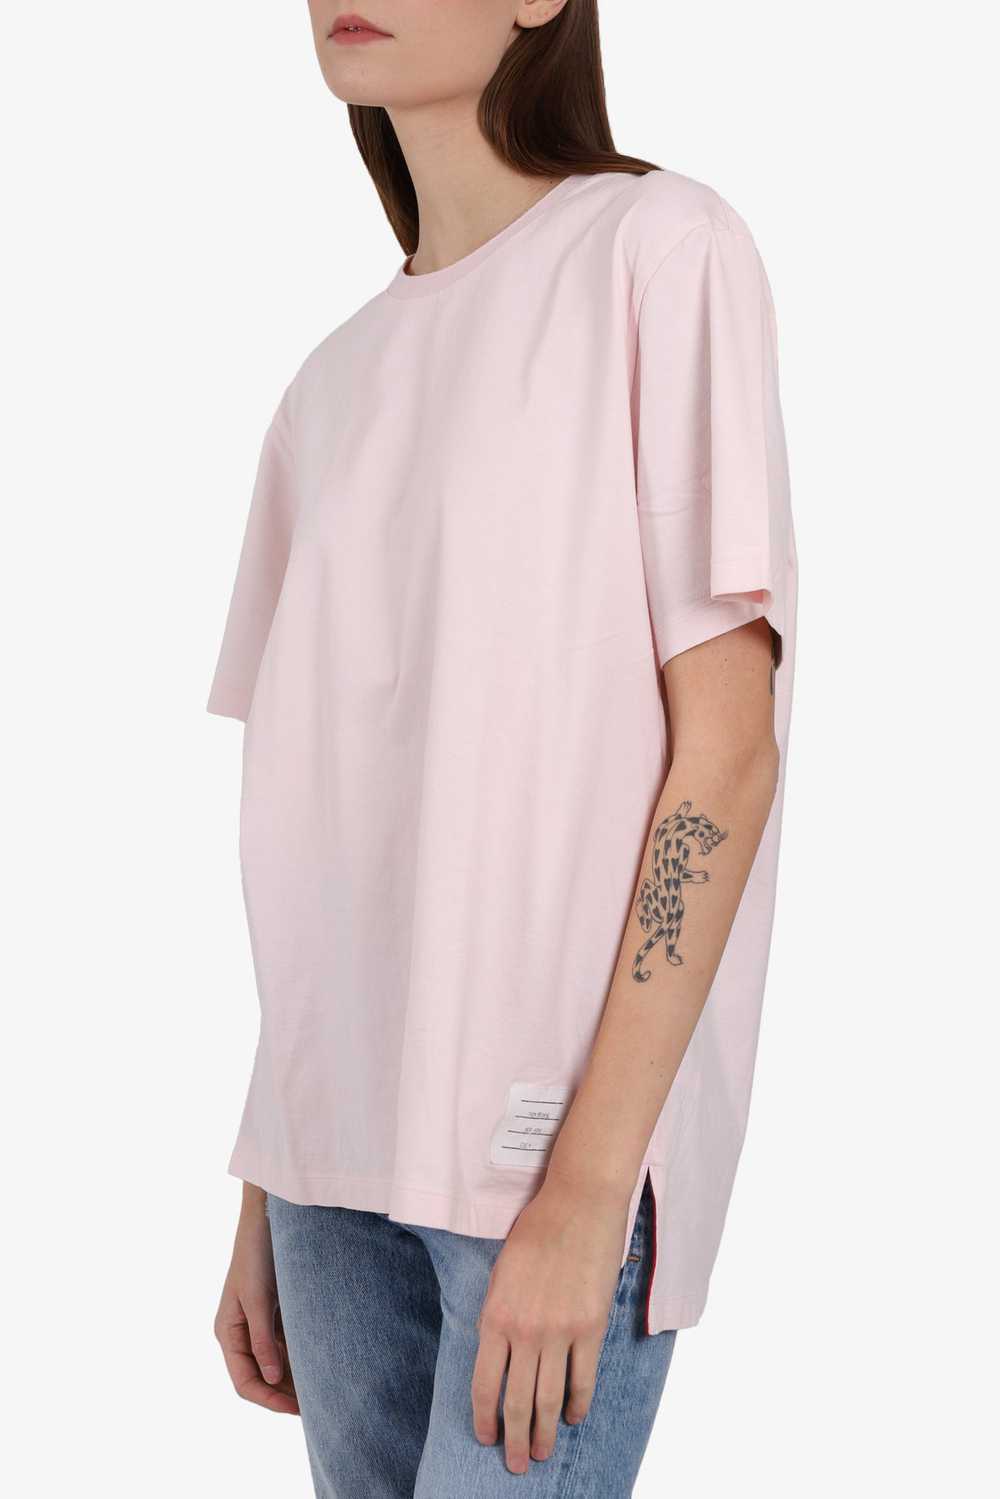 Thom Browne Pink Cotton Scoop Neck T-Shirt Size 4 - image 2